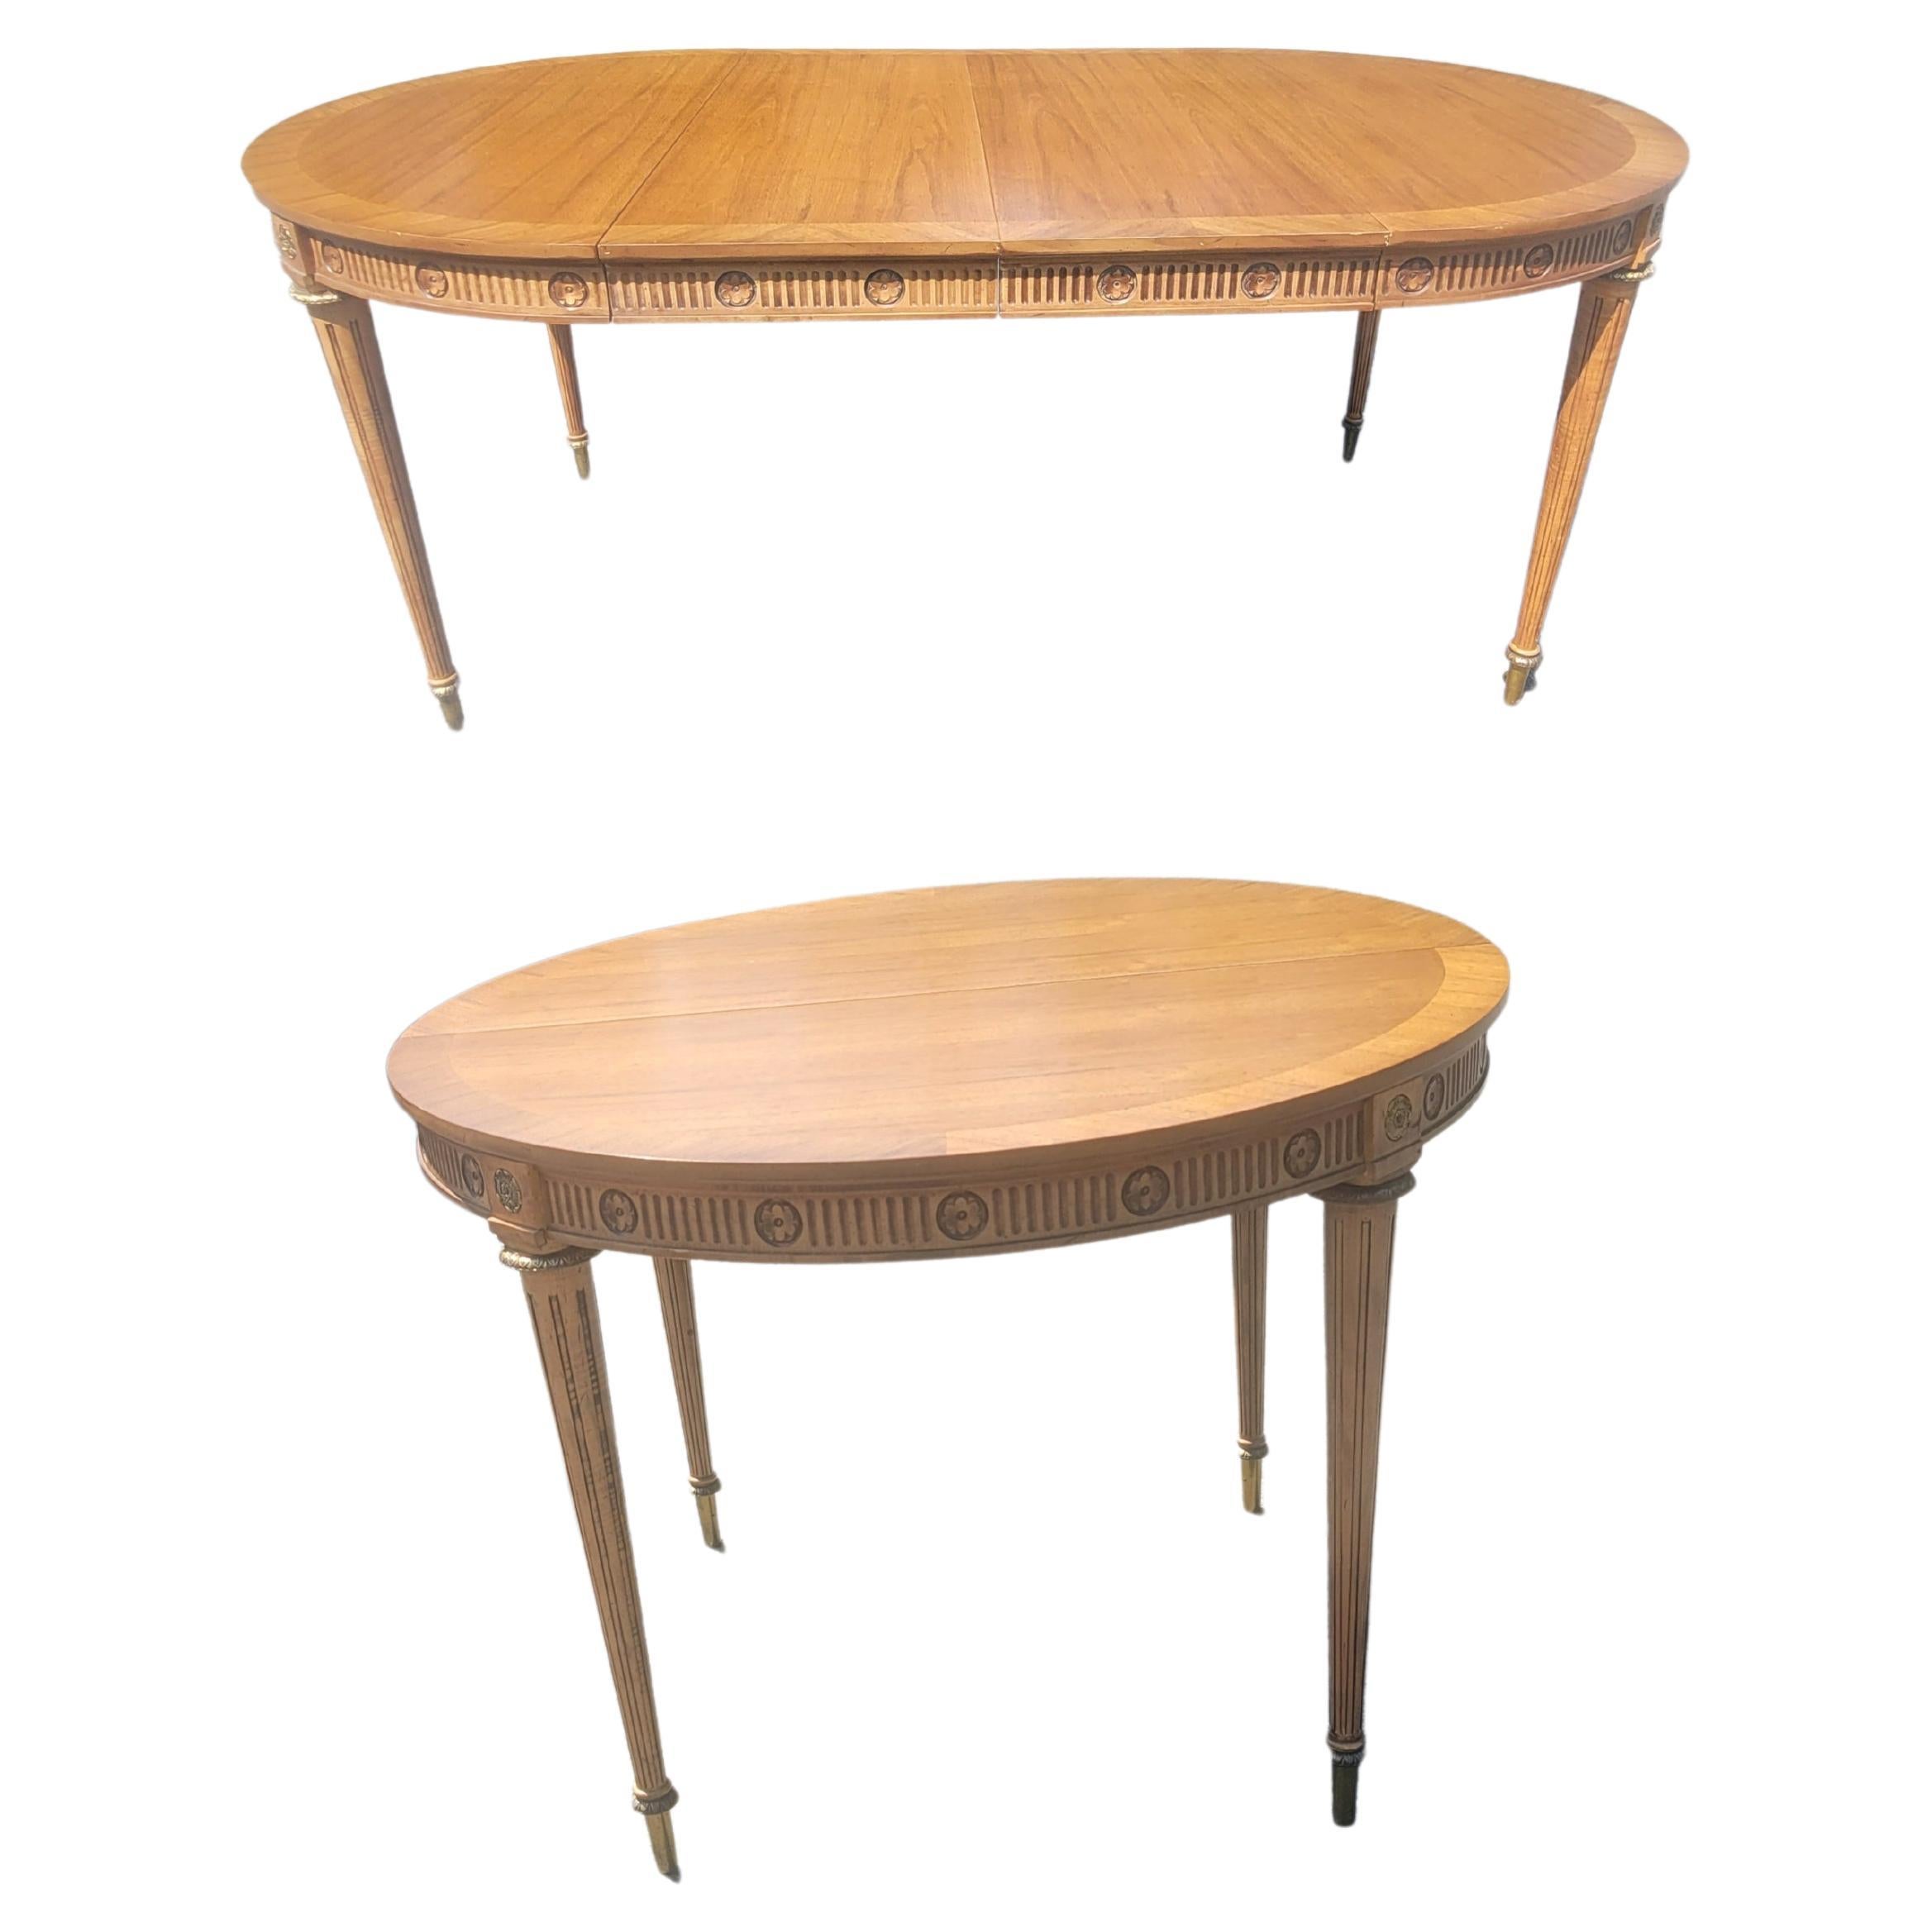 J.L. Metz Furniture French Walnut and Brass Extension Dining Table with 2 Leaves